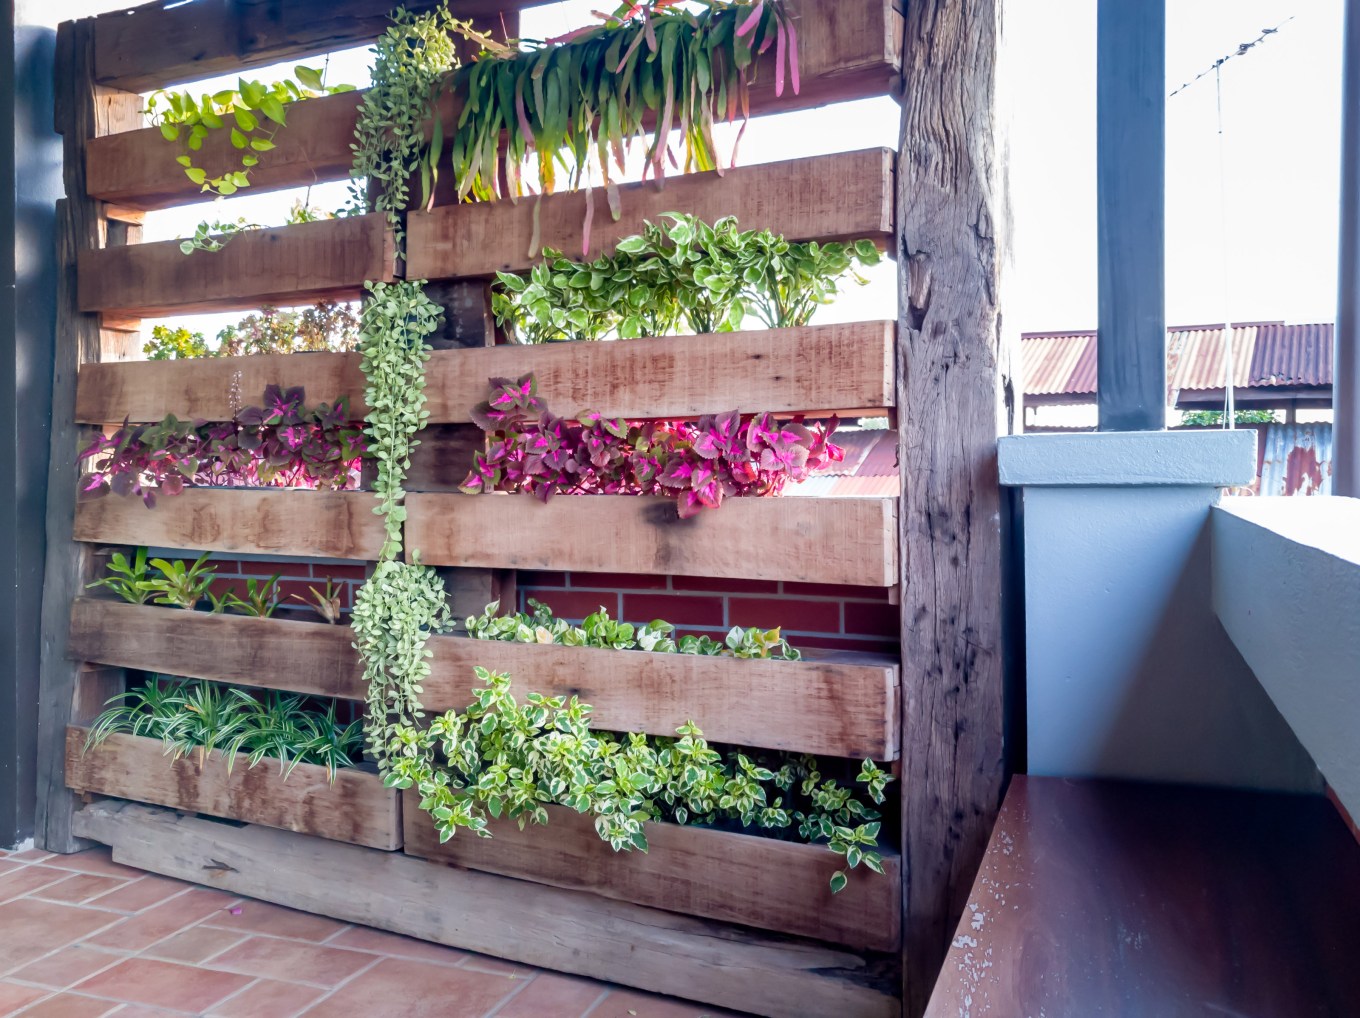 Vertical Garden made of reclaimed wood adding privacy to a deck